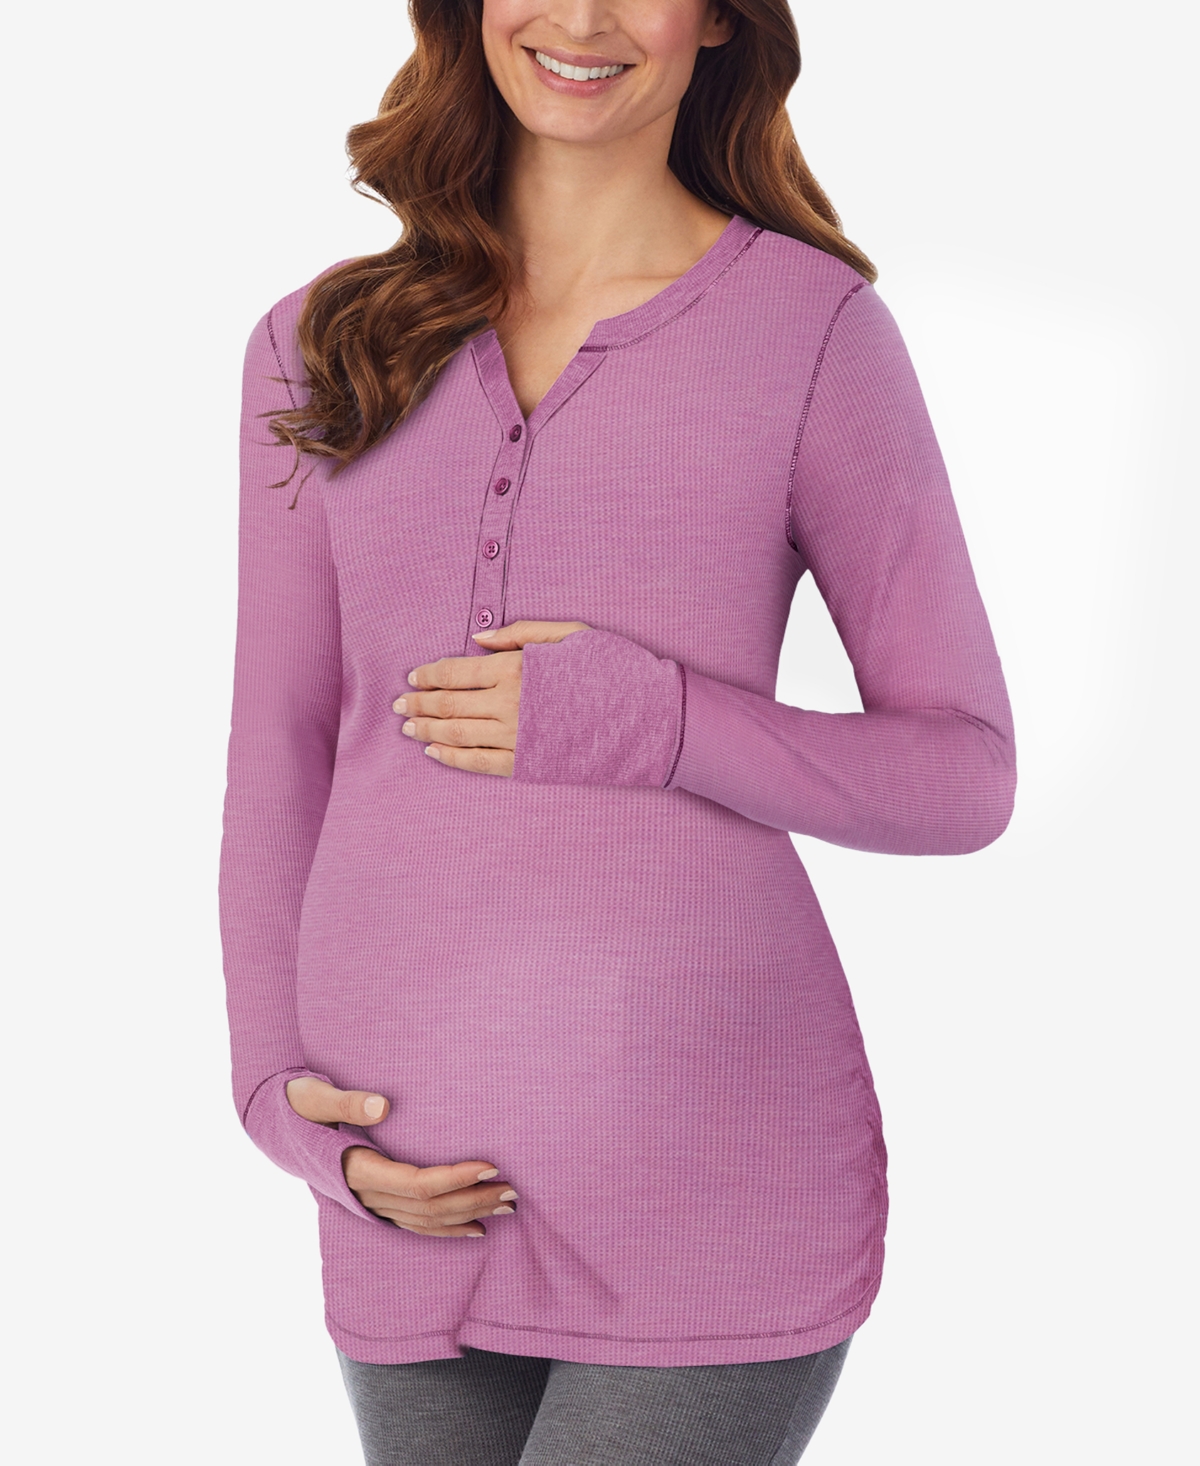 CUDDL DUDS WOMEN'S THERMAL LONG-SLEEVE HENLEY MATERNITY TOP